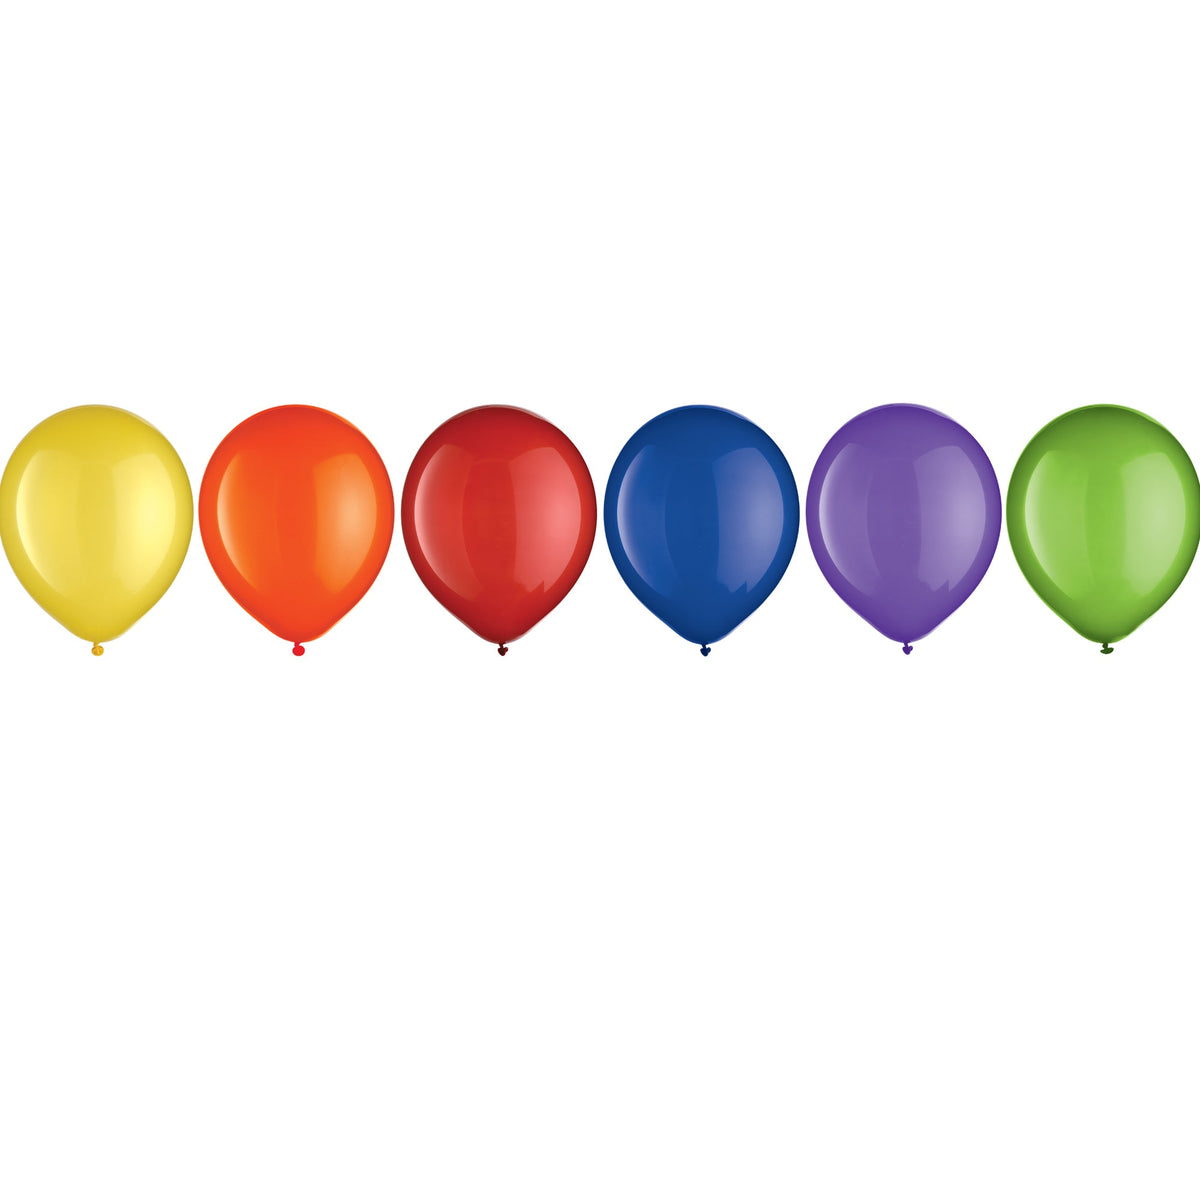 Assorted Solid Color 12" helium quality 15 count Latex Balloons